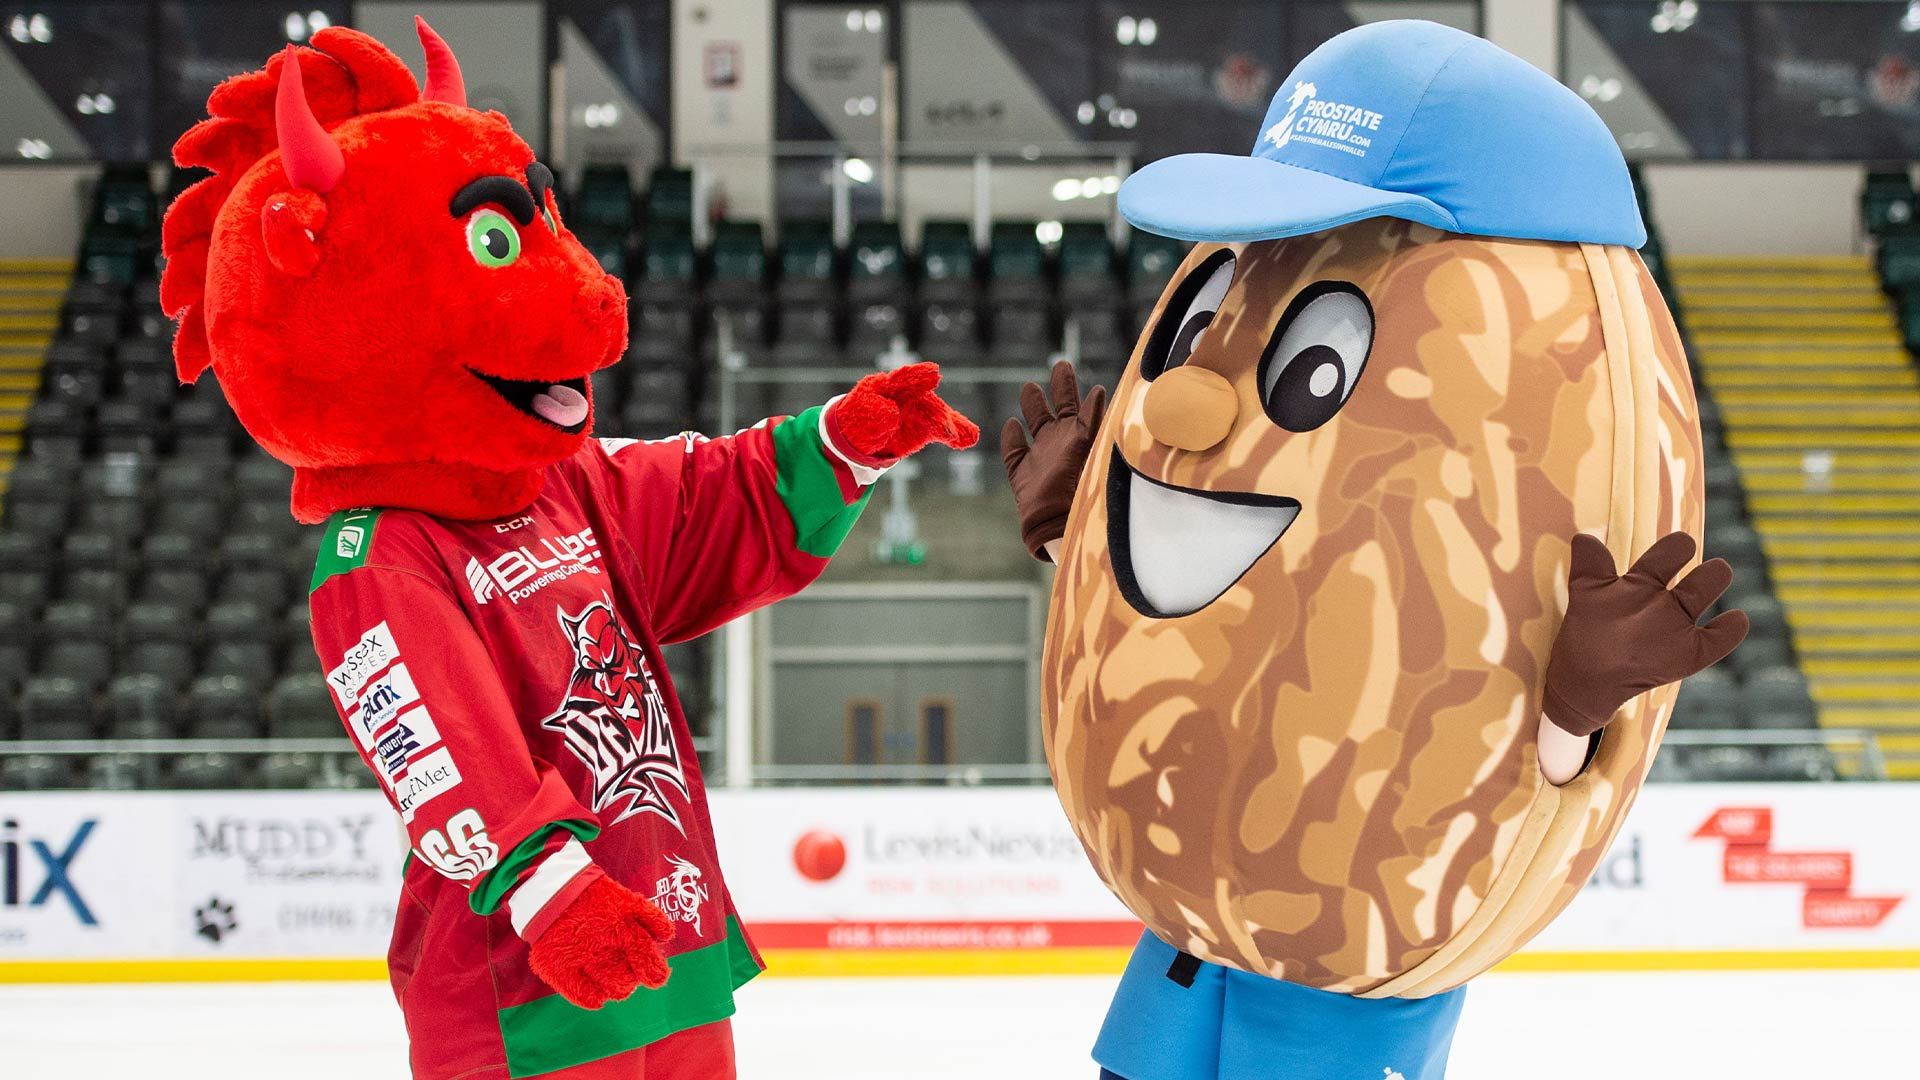 Prostate Cymru are back with Cardiff Devils for the 2023/24 season.